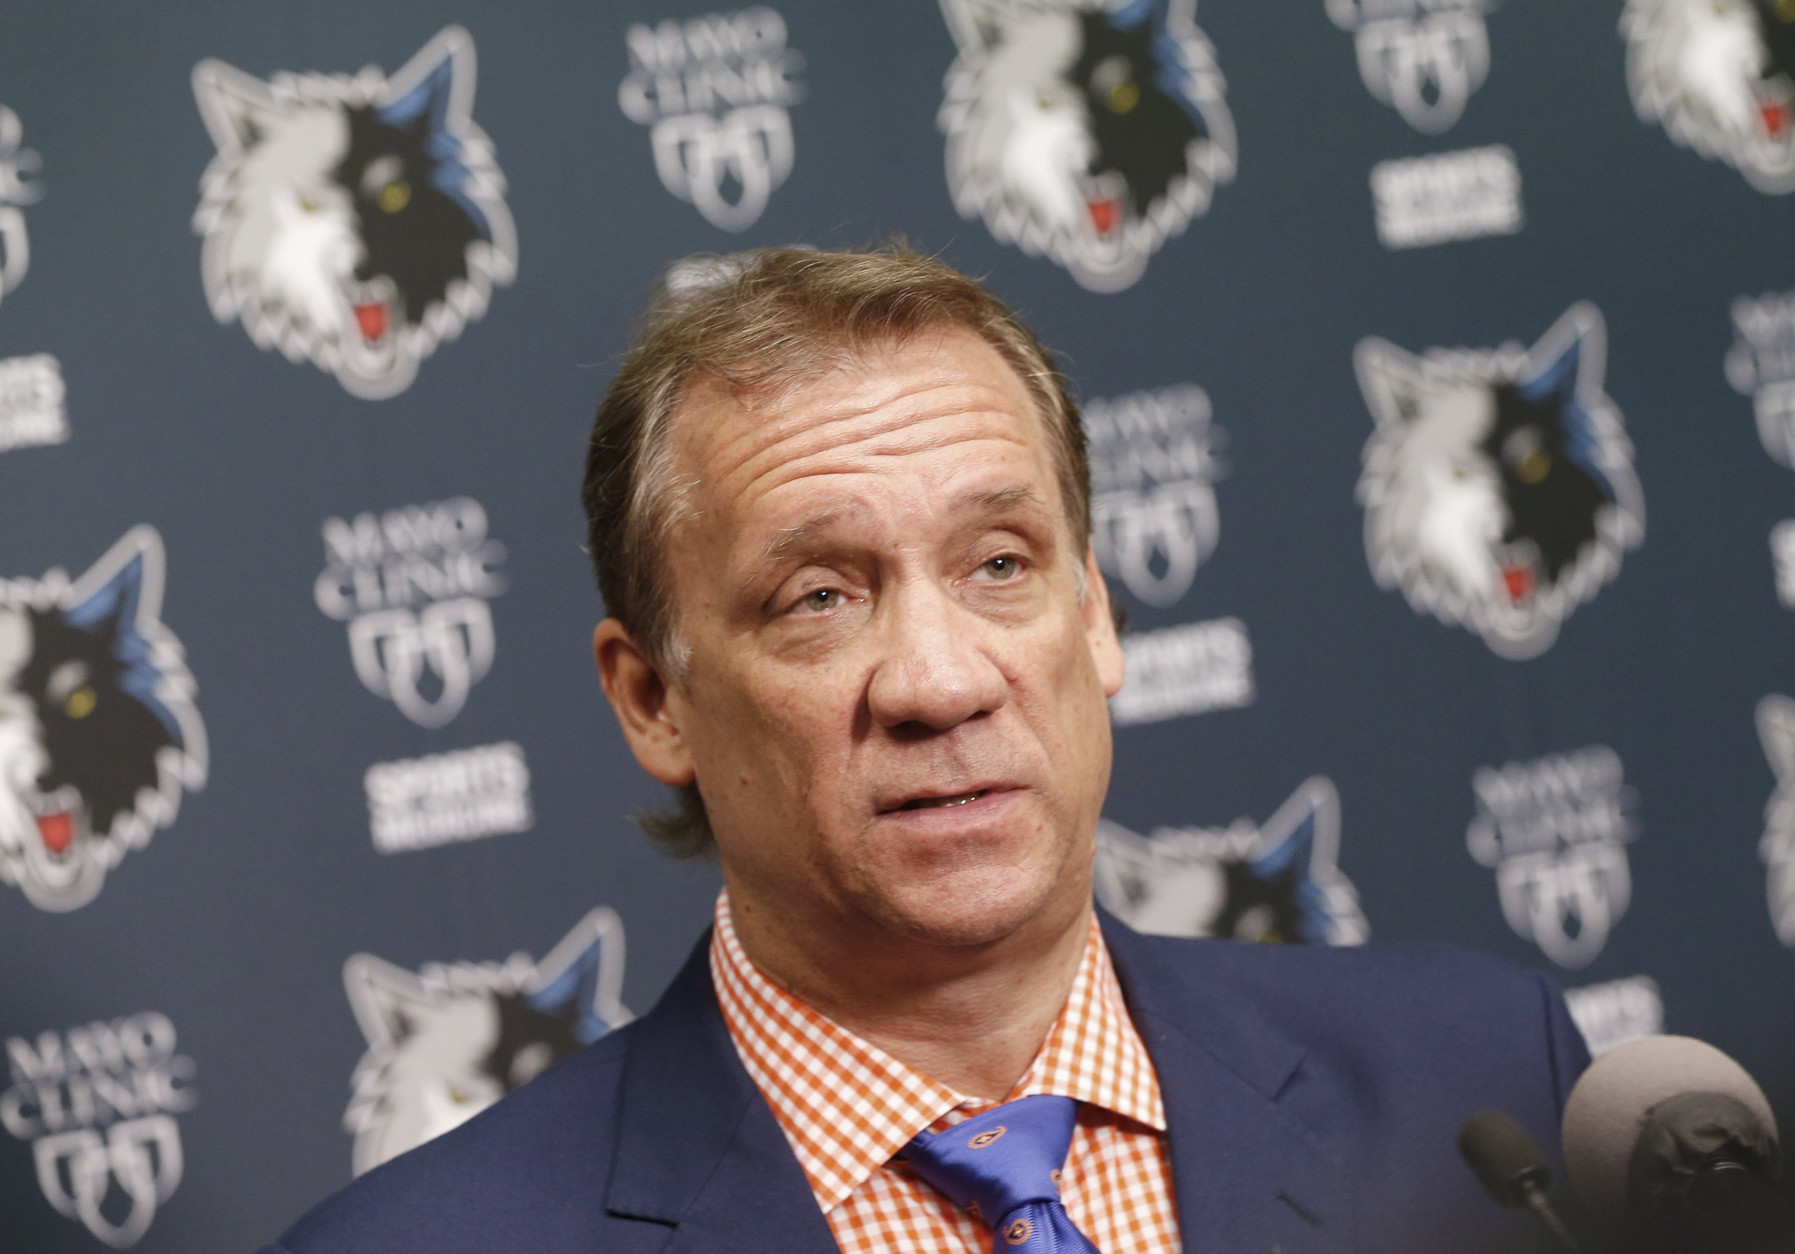 Former Wizards coach Phil “Flip” Saunders has died